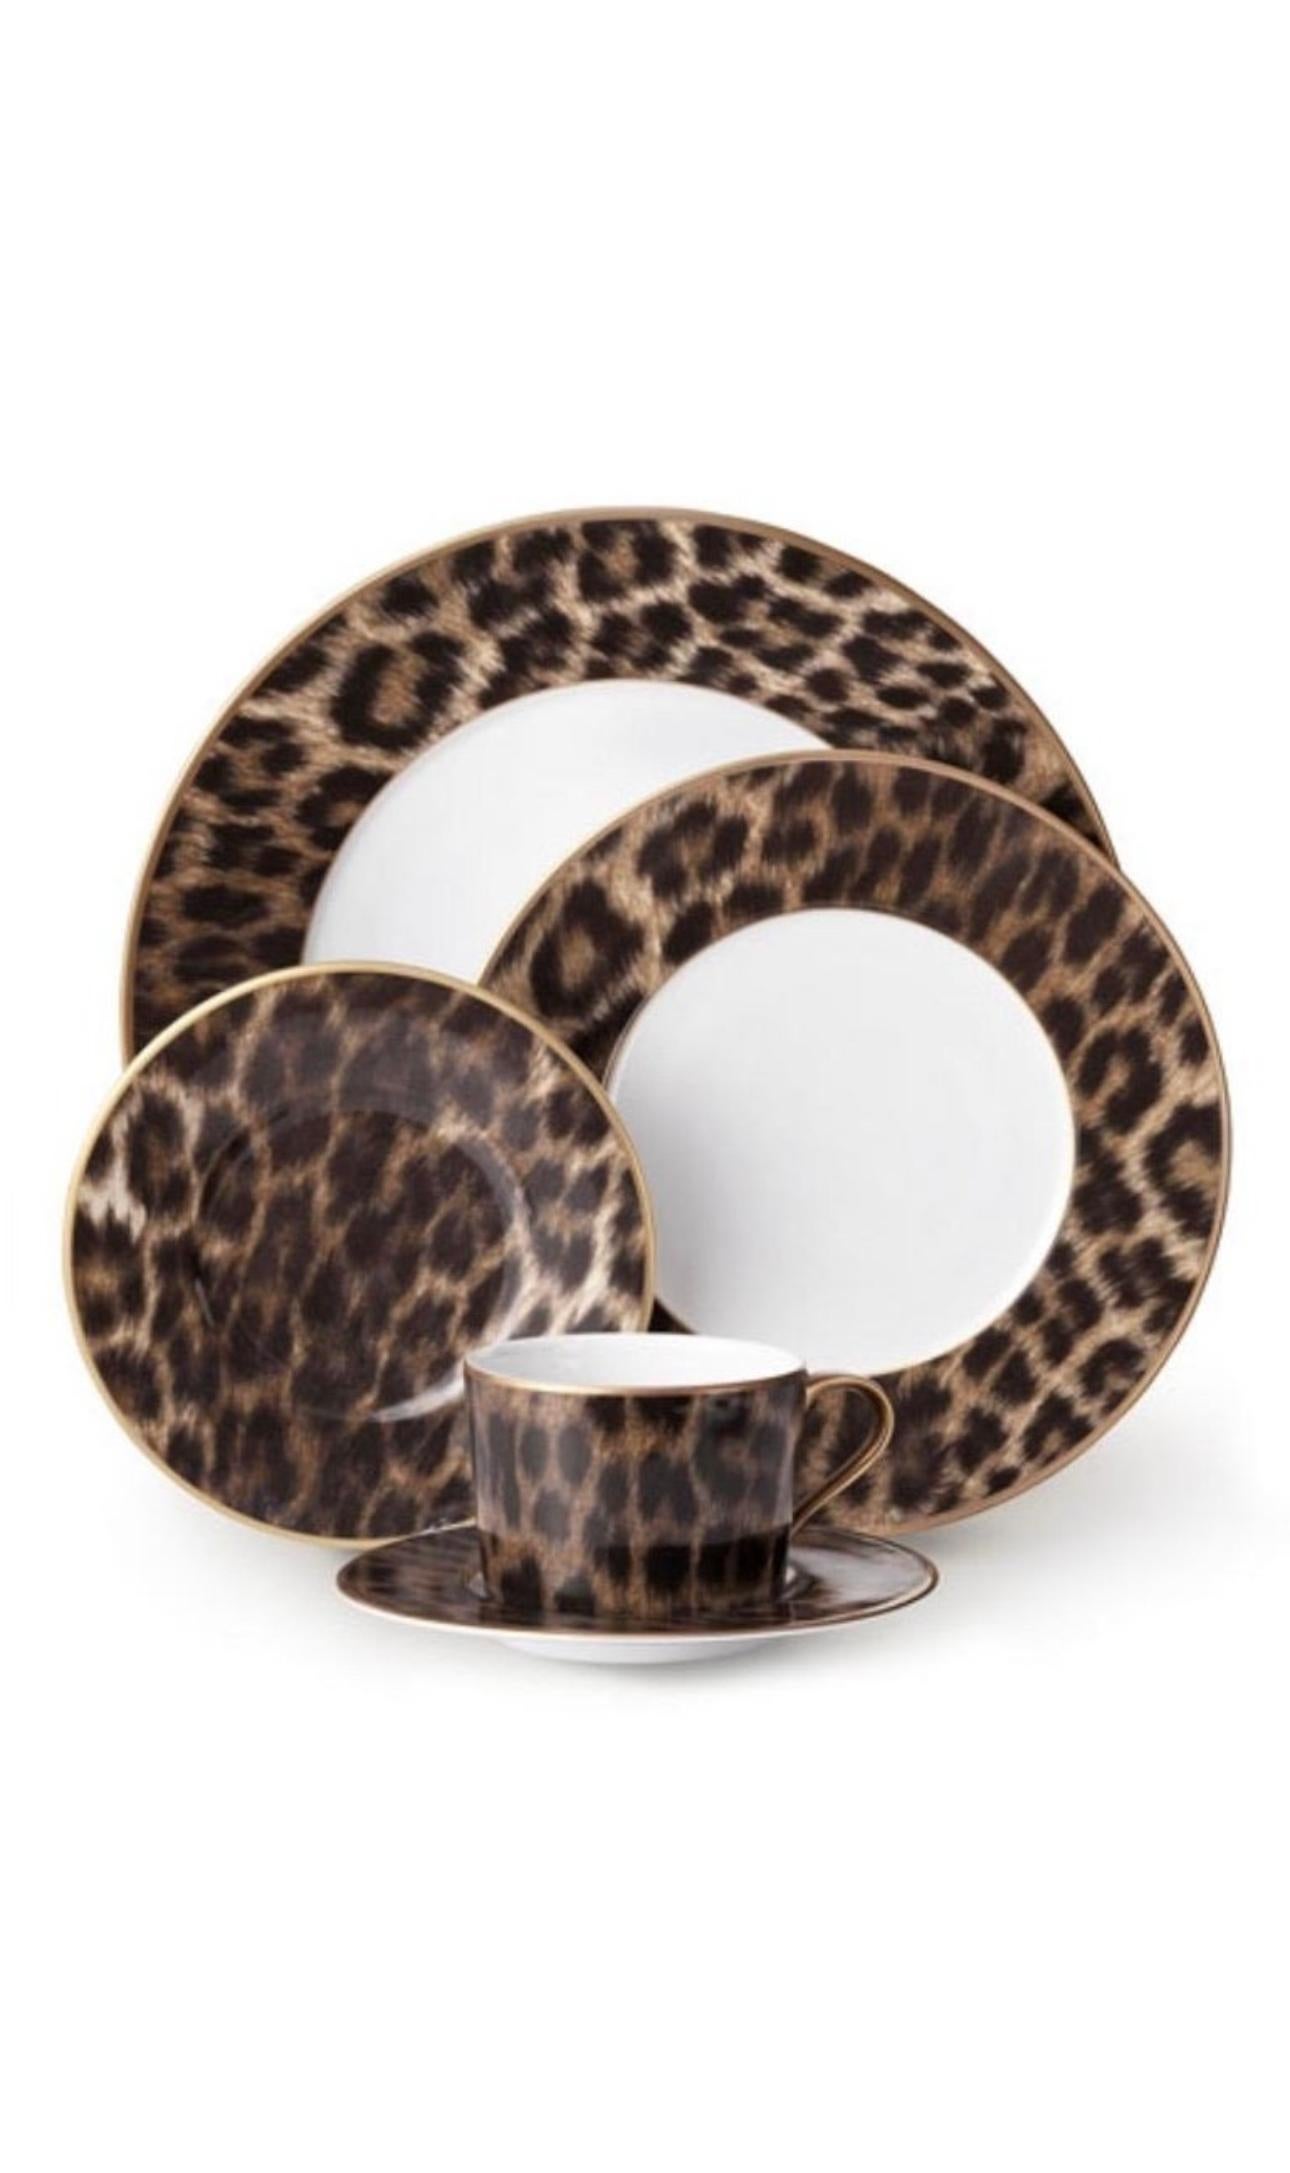 A set of six (6) place settings in the Hutchinson pattern made by Ralph Lauren Home. 

Made in Portugal, circa 2018.

Features a rich brown and white leopard pattern. This pattern has been discontinued.

A total of 30 (thirty) pieces detailed